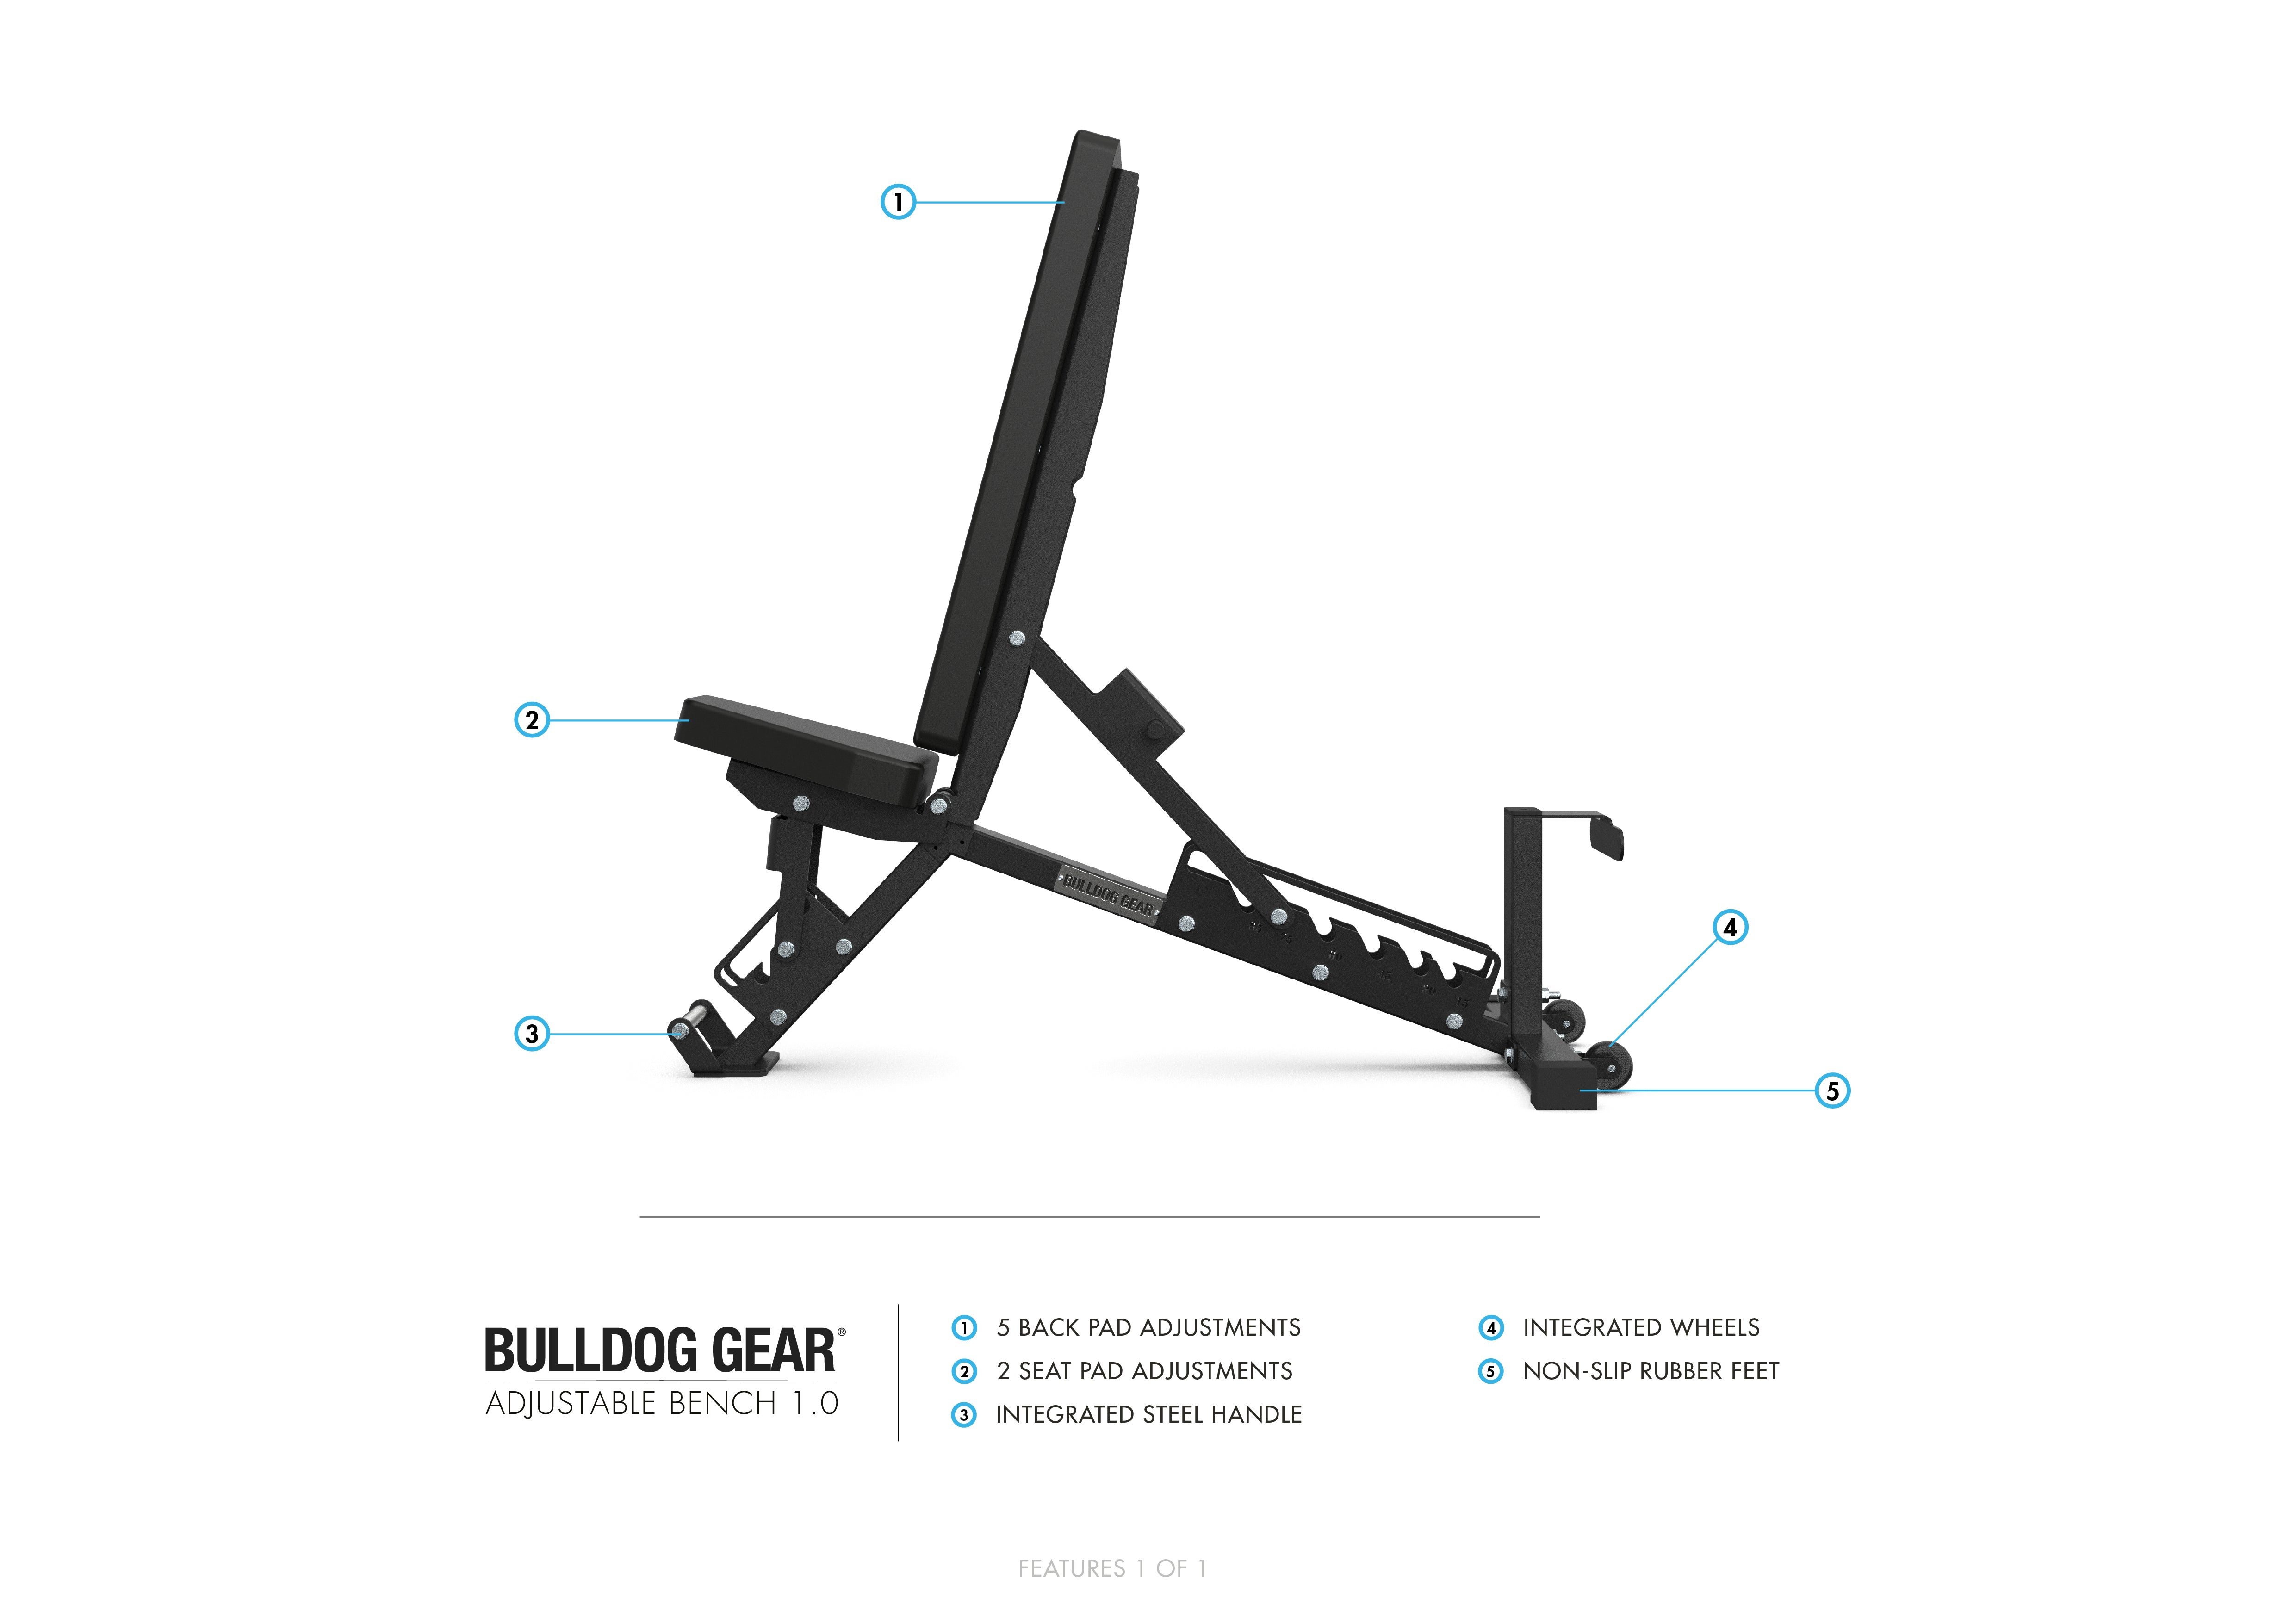 Bulldog Gear Adjustable weight lifting bench 1.0 product features